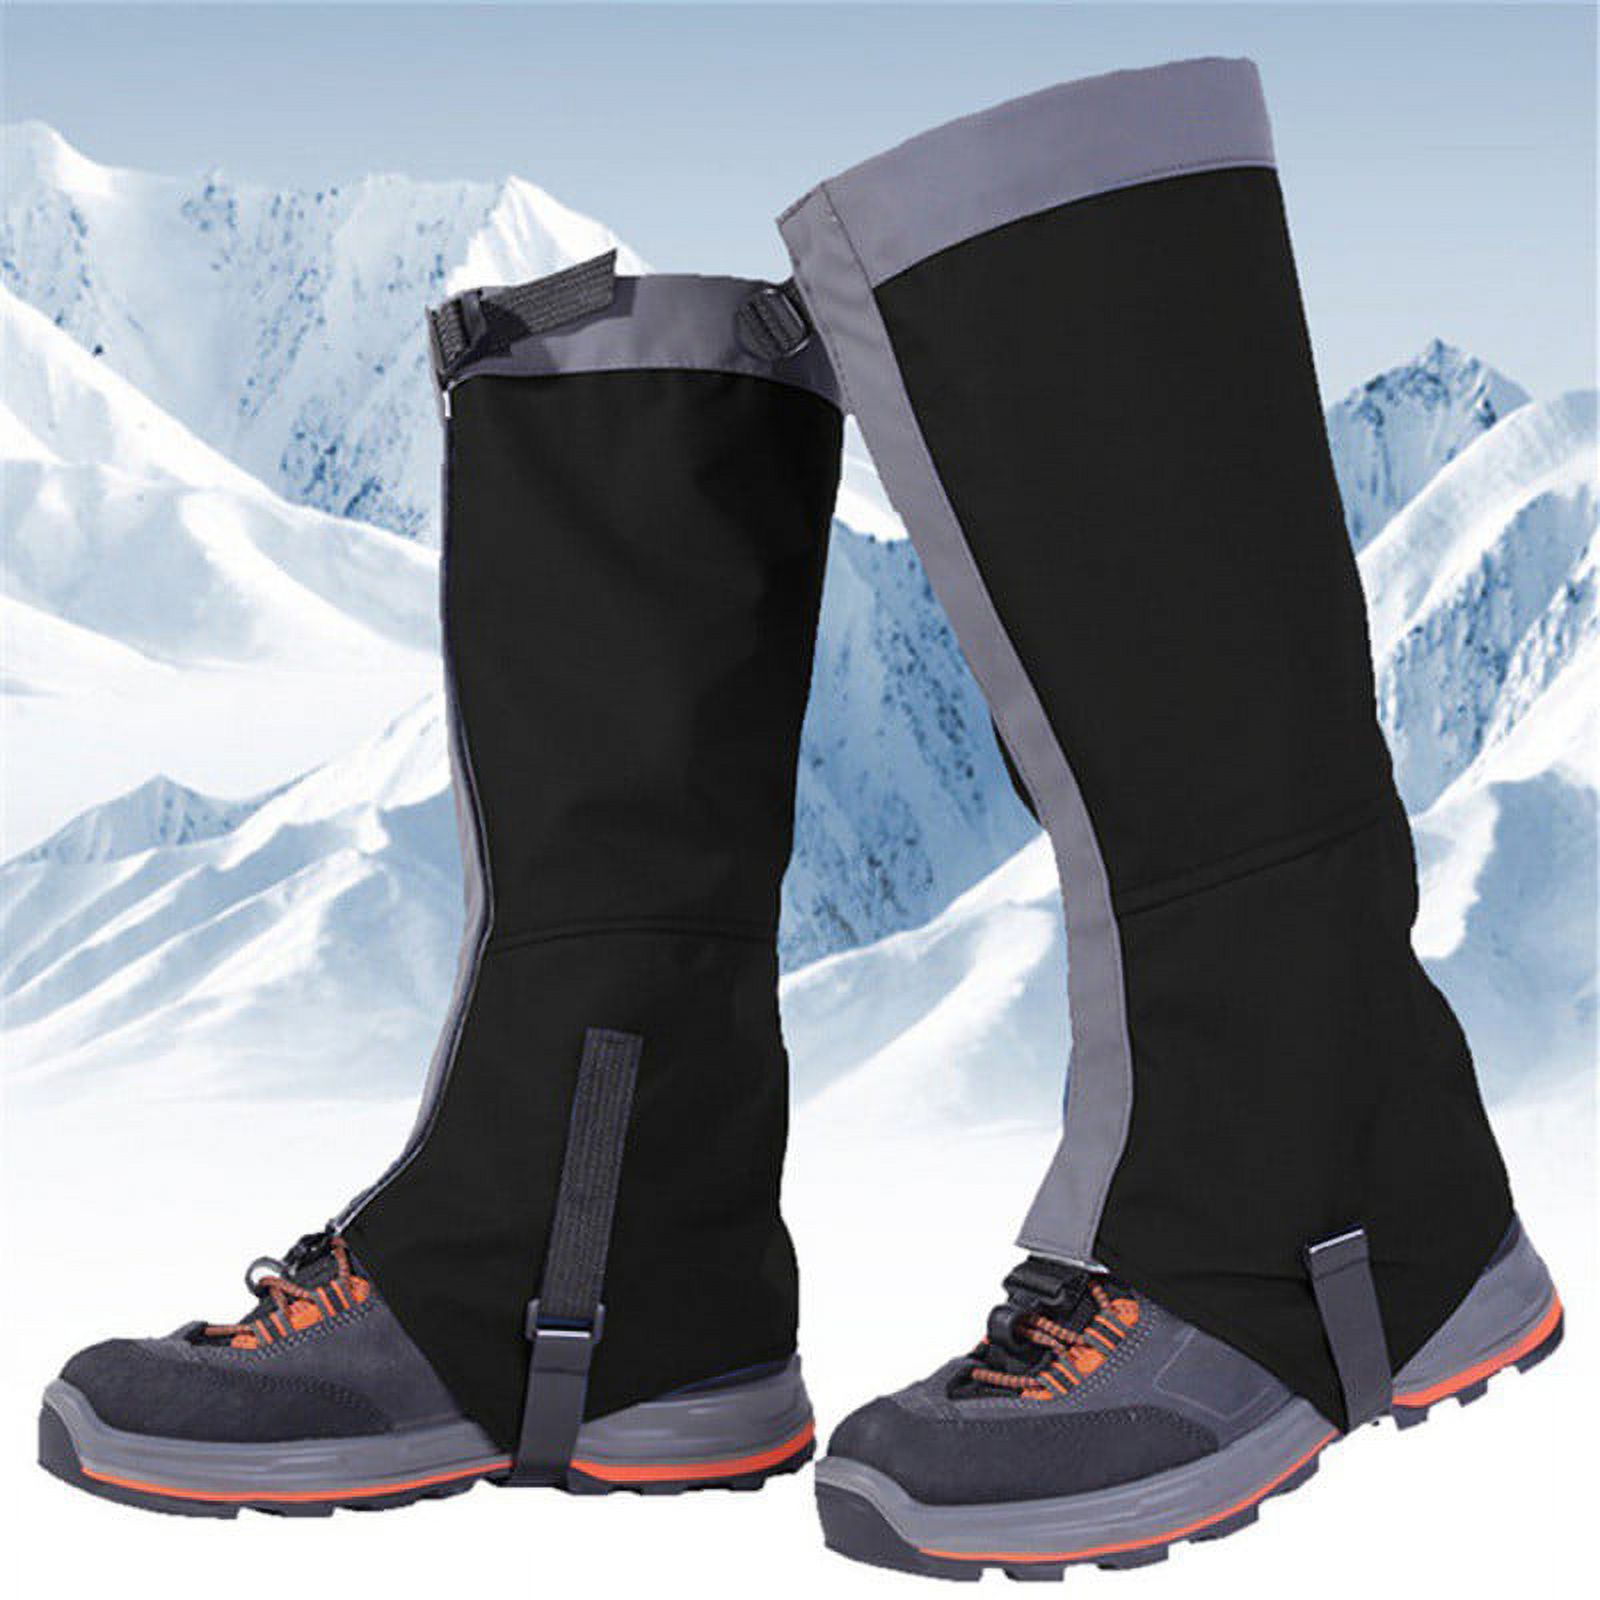 Outdoor Mountain Hiking Hunting Boot Gaiters Waterproof Snow Snake High Leg Shoes Cover - image 1 of 2